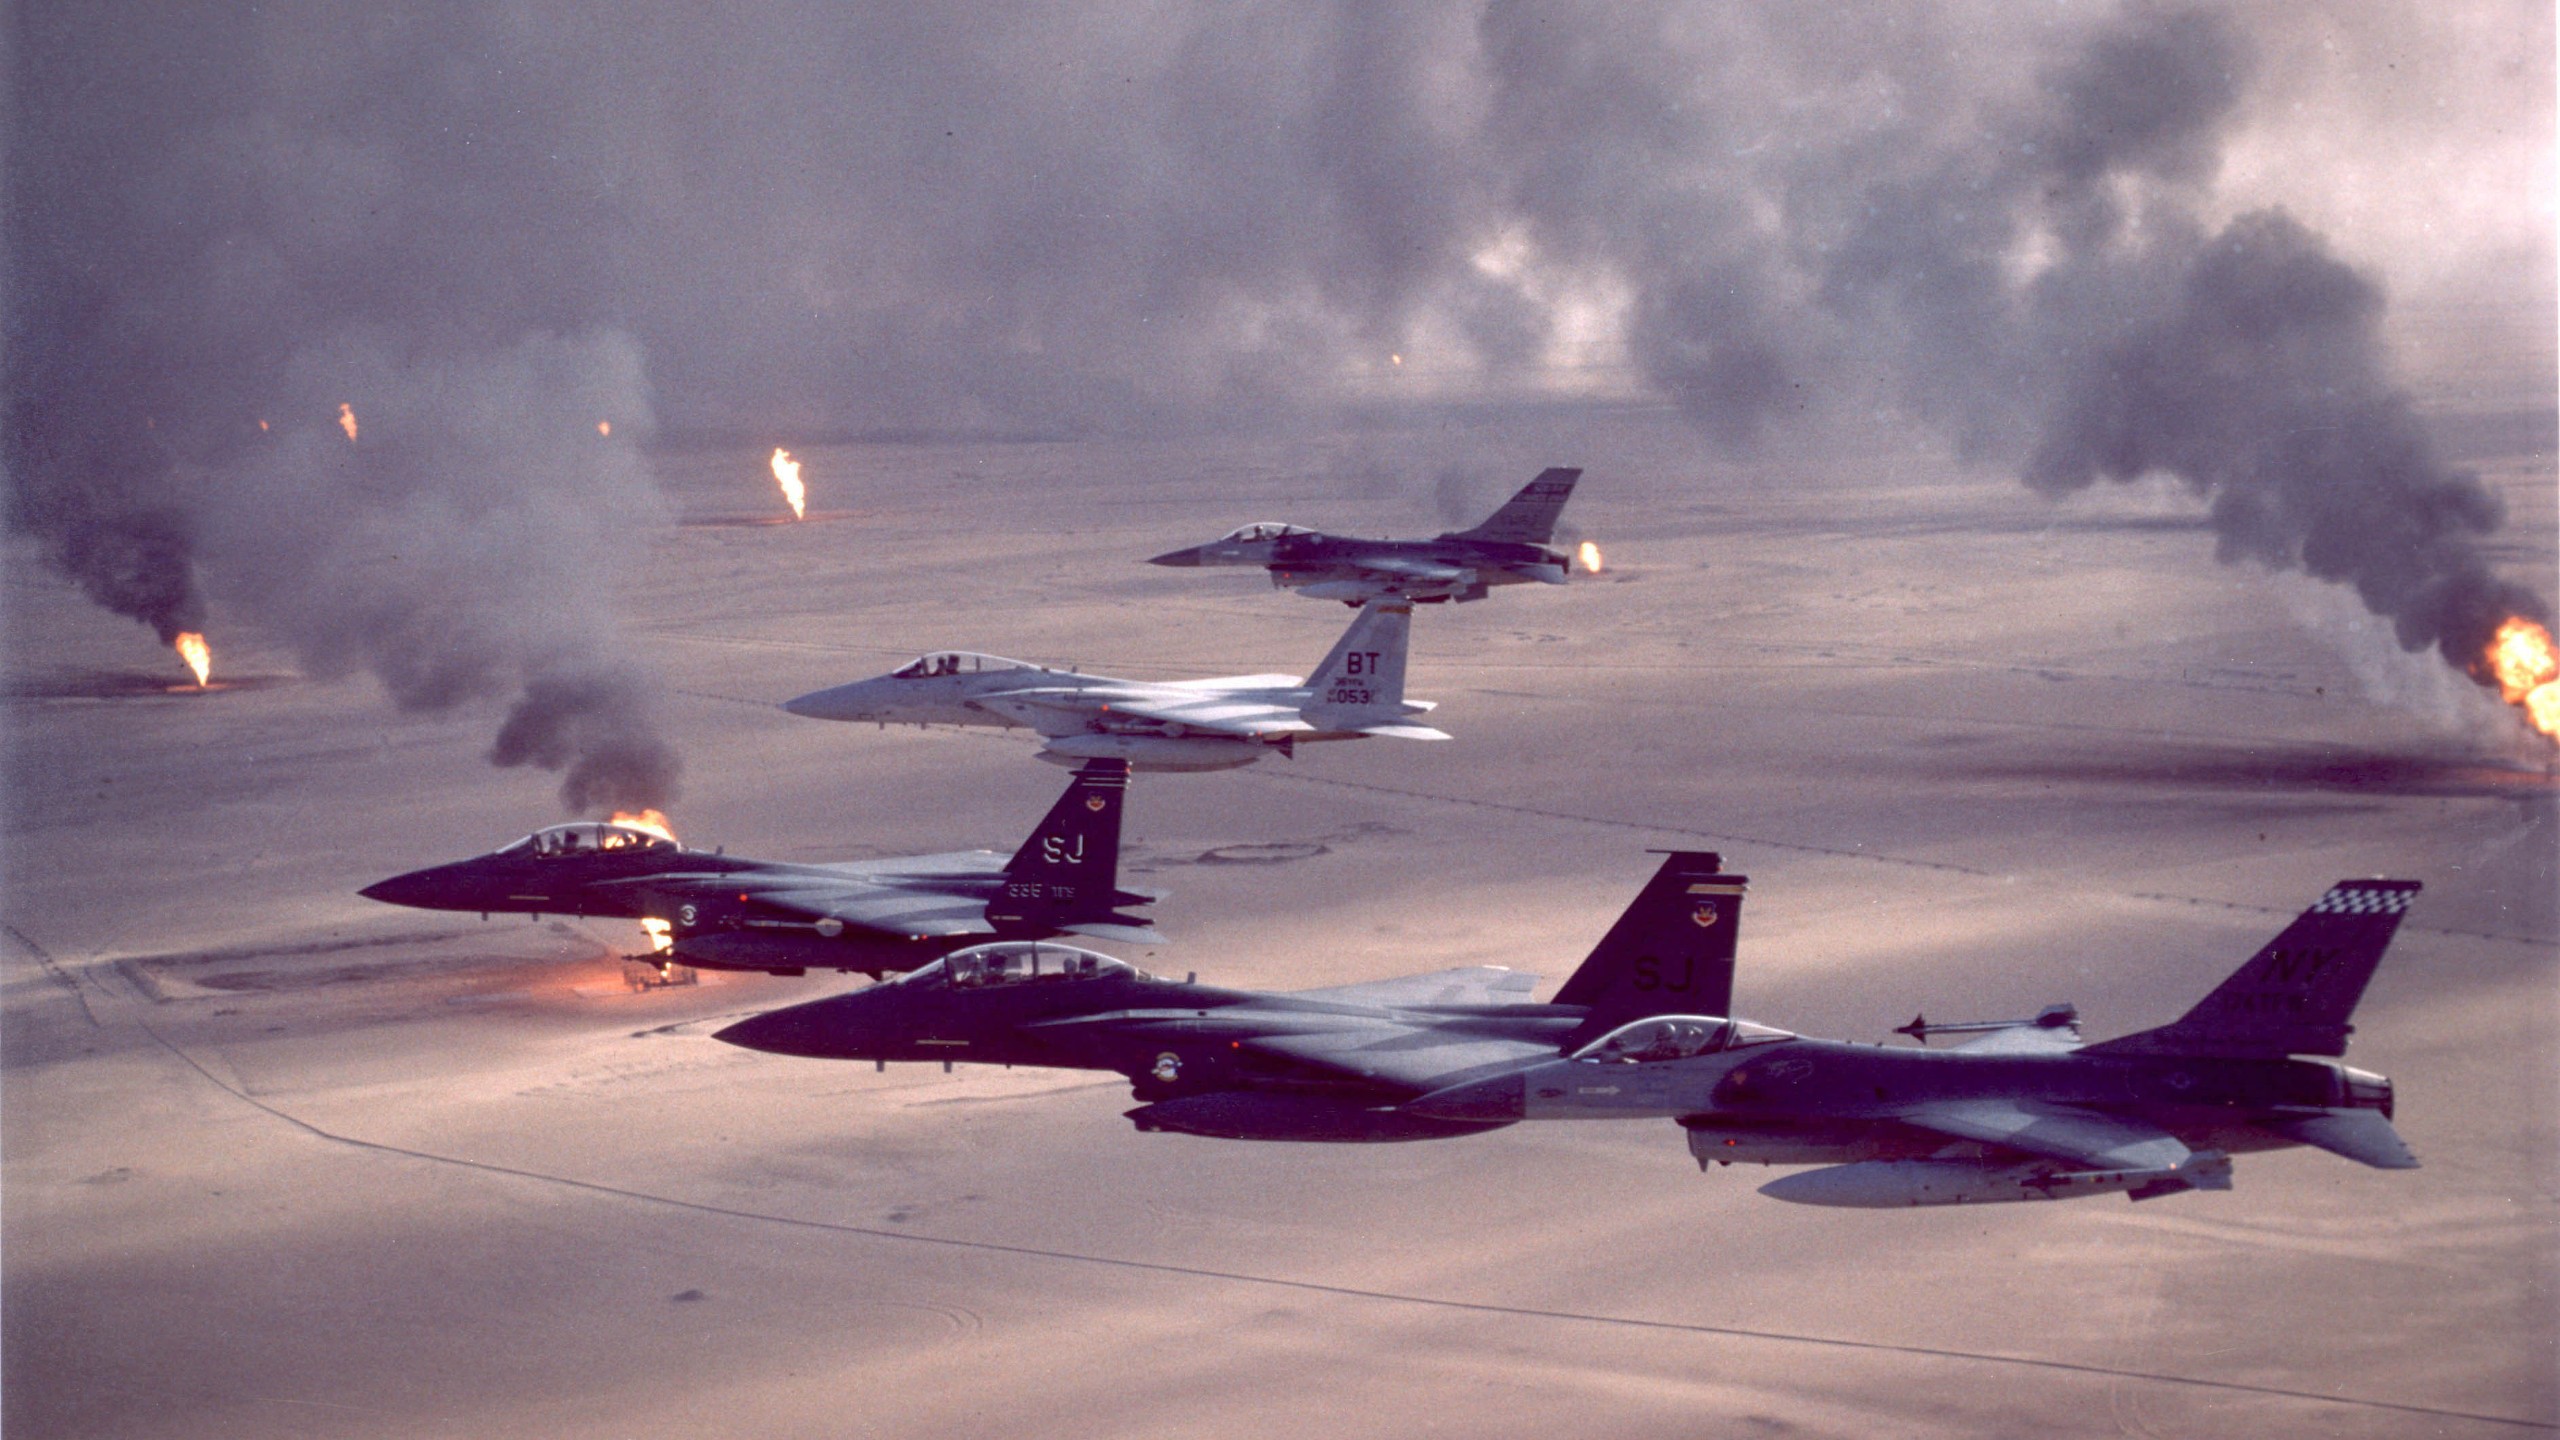 General 2560x1440 military military aircraft Operation Desert Storm Kuwait US Air Force General Dynamics F-16 Fighting Falcon desert vehicle aircraft war fire oil pump burning smoke 1991 (Year) American aircraft flying F-15 Eagle jet fighter pilot General Dynamics